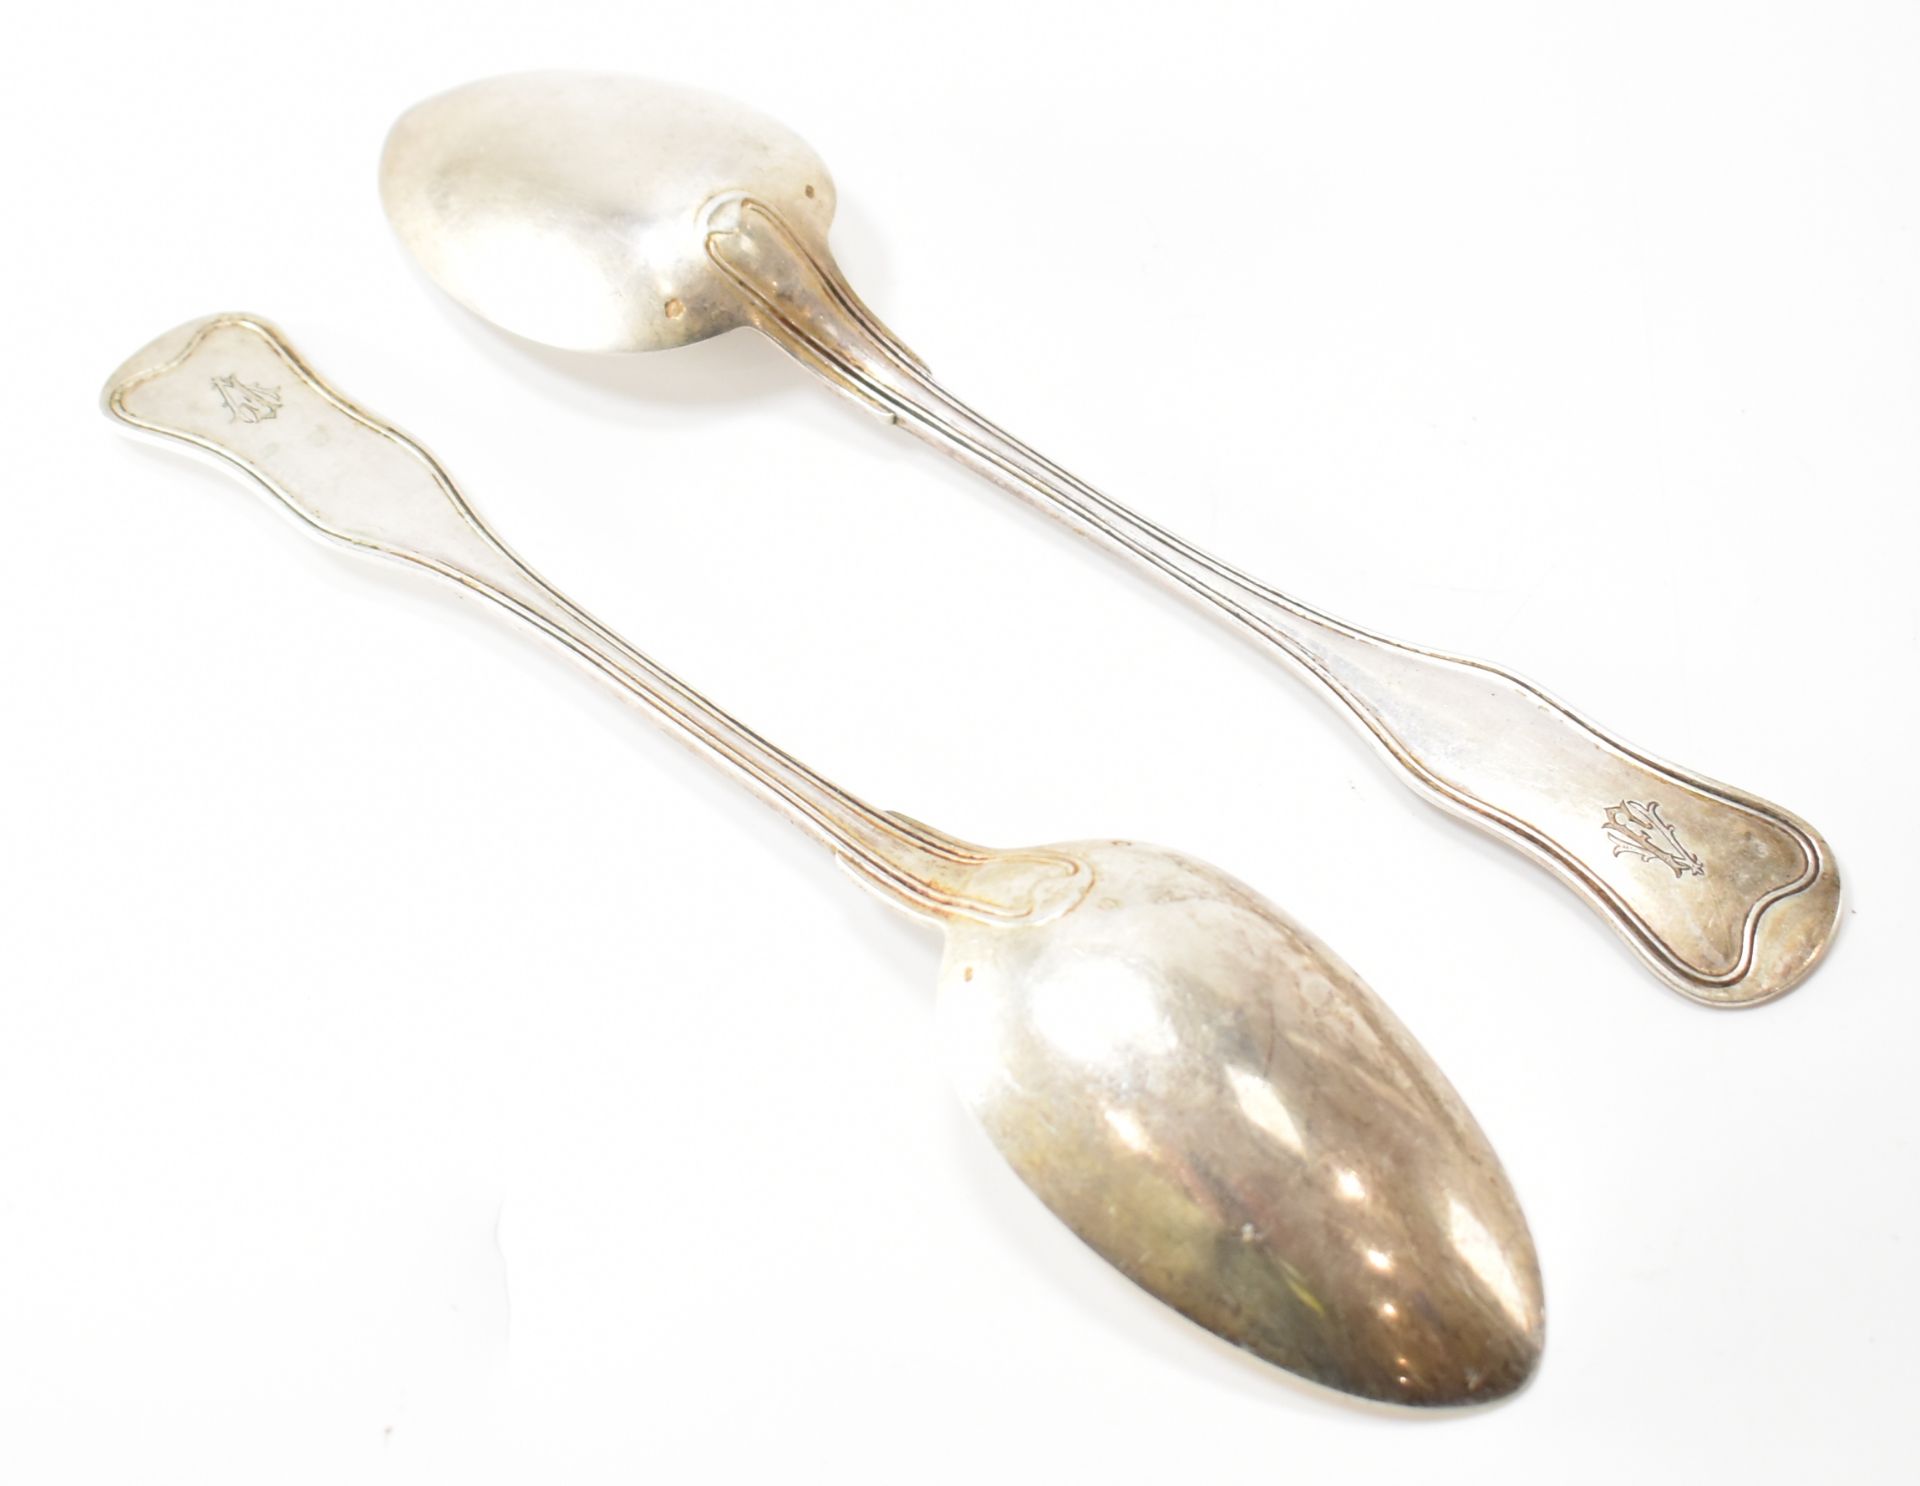 PAIR OF ANTIQUE AUSTRO HUNGARIAN SILVER SERVING SPOONS - Image 2 of 5